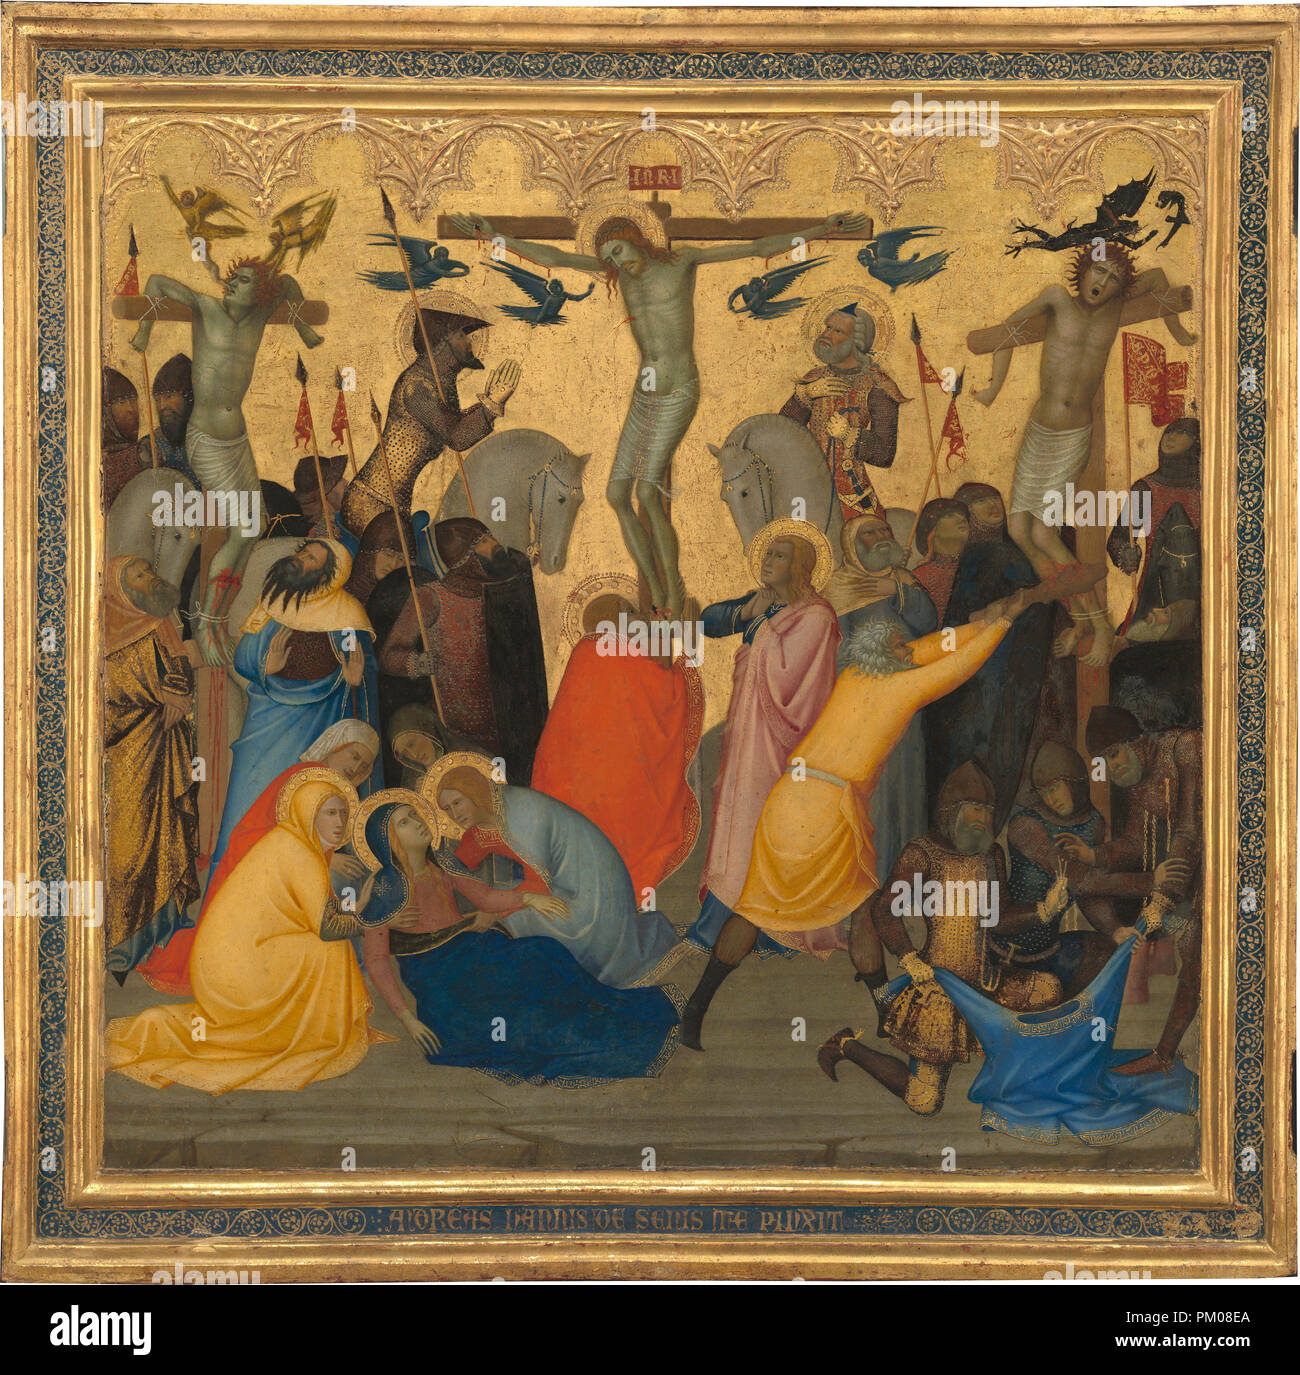 Scenes from the Passion of Christ: The Crucifixion [middle panel]. Dated: 1380s. Dimensions: painted surface: 46.9 × 49 cm (18 7/16 × 19 5/16 in.)  overall: 56.9 × 57.9 × 3.4 cm (22 3/8 × 22 13/16 × 1 5/16 in.). Medium: tempera on panel. Museum: National Gallery of Art, Washington DC. Author: ANDREA VANNI. Stock Photo